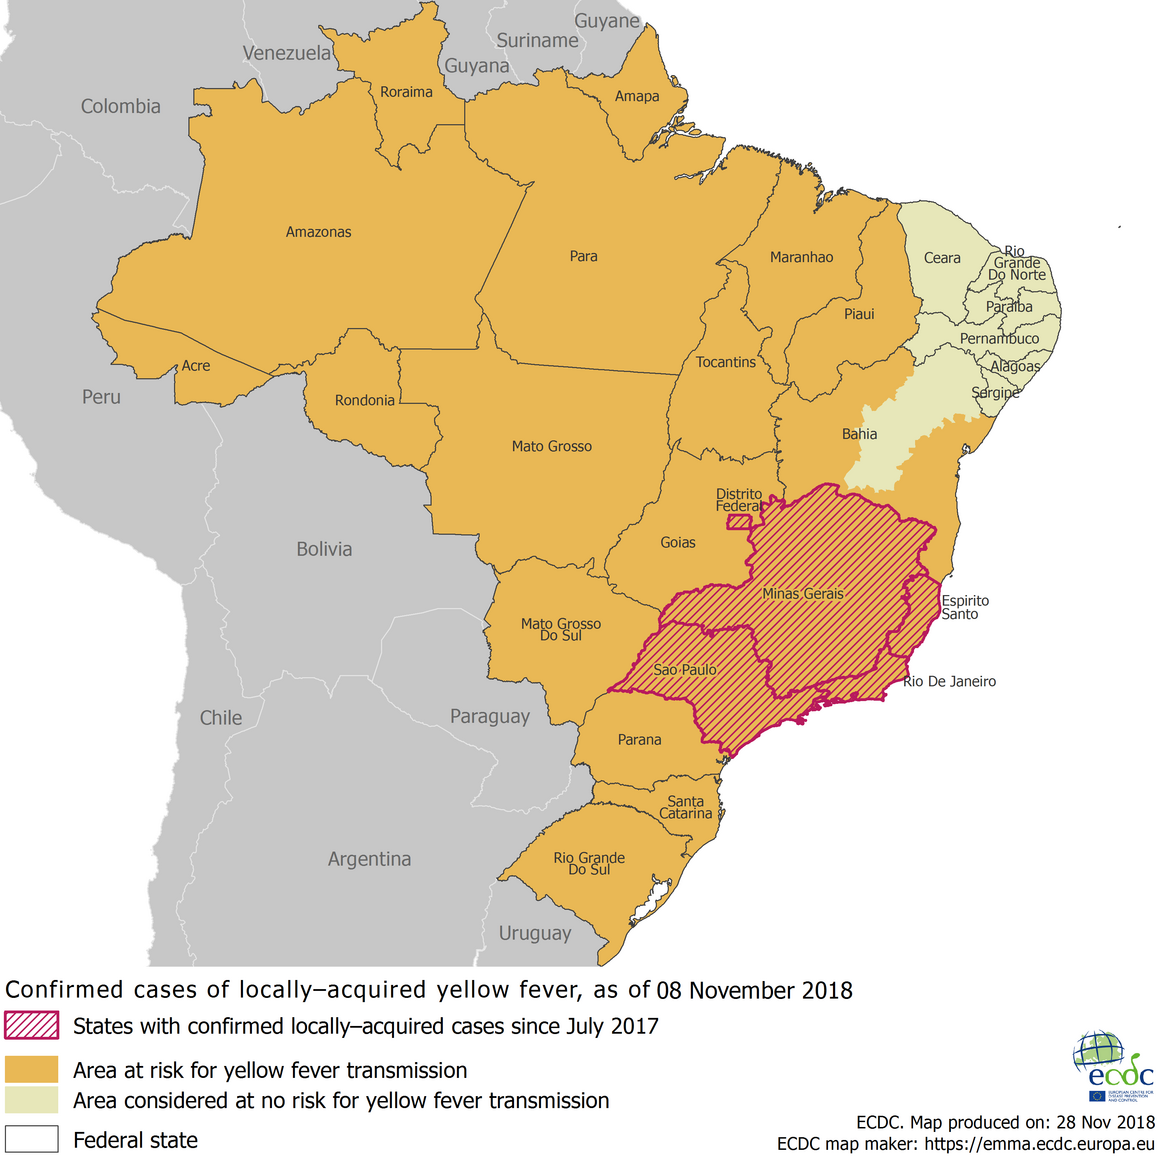 Yellow fever risk areas in Brazil, as of 28 November 2019